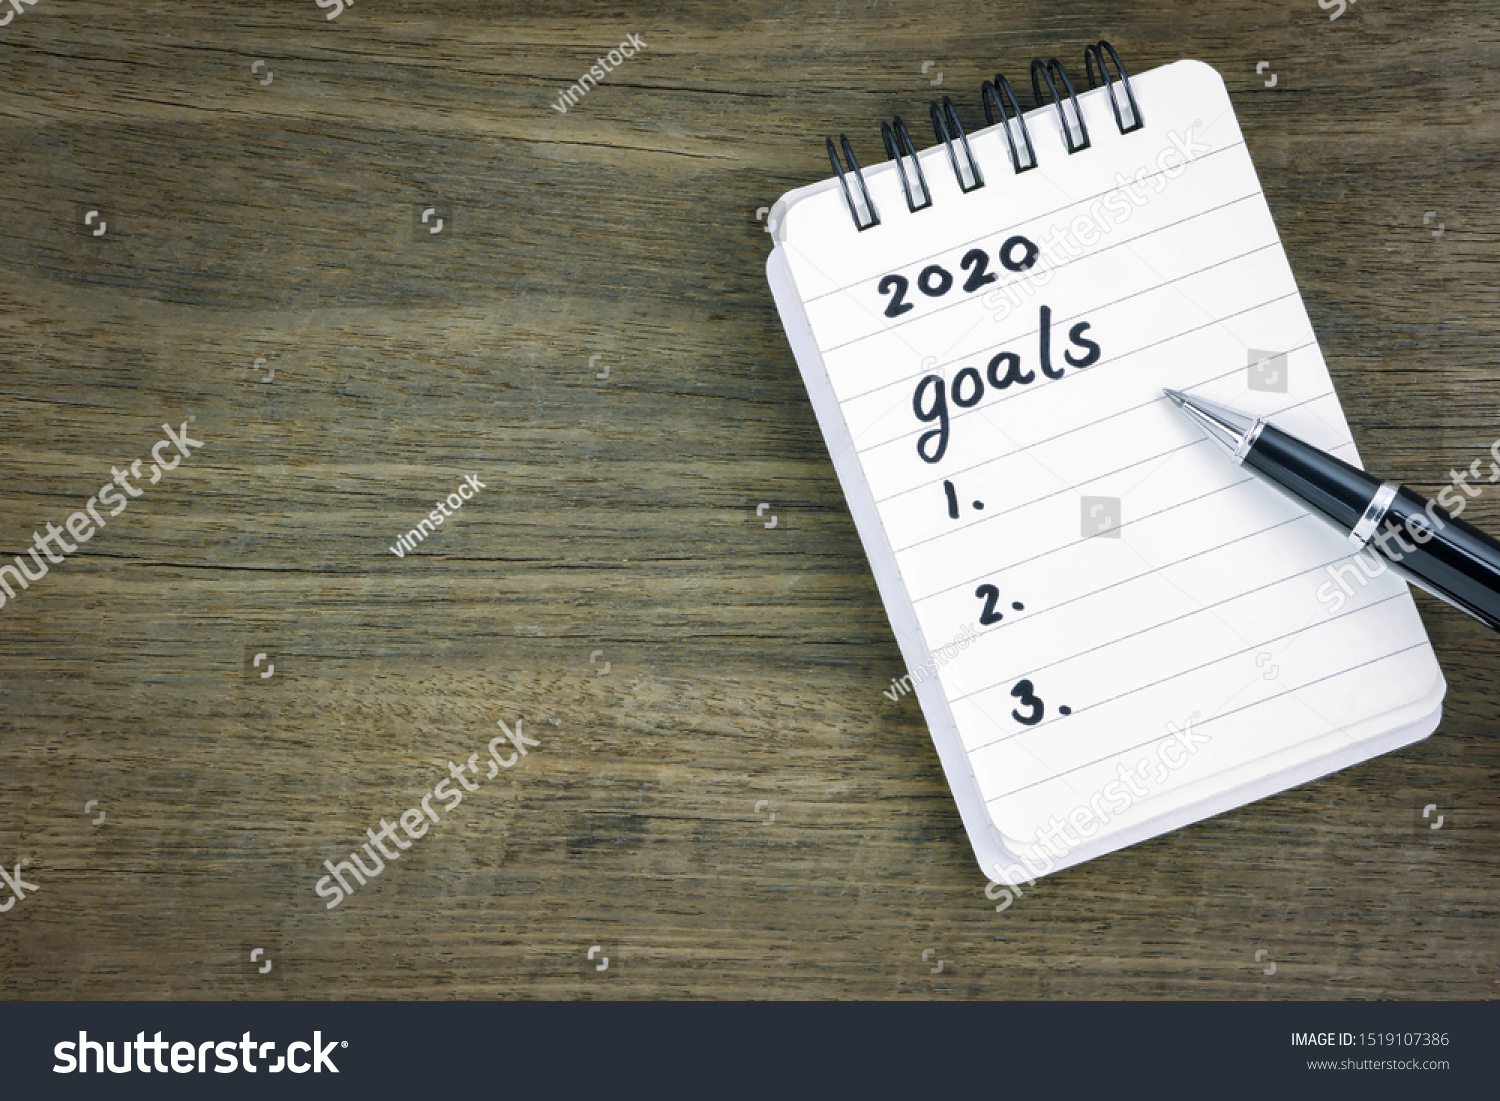 Top view 2020 goals list on notepad. Handwriting on memo paper notebook with black pen over wooden texture background, table blank space. Beginning of new goals and new year resolution concepts. #1519107386